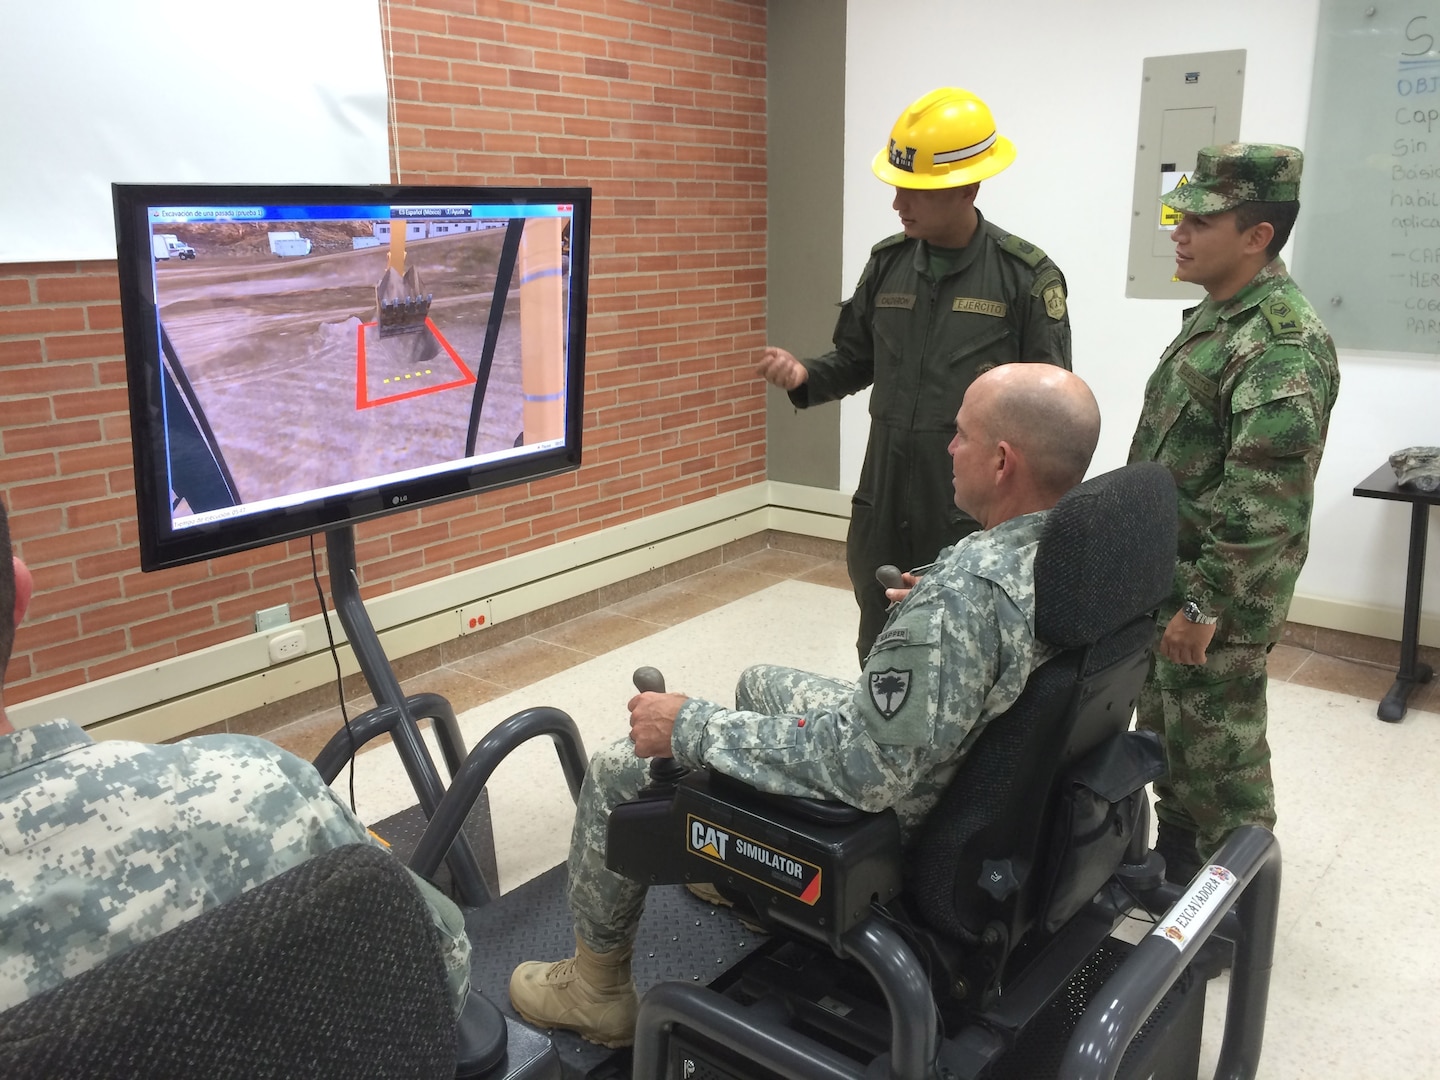 Col. Brad Owens, South Carolina National Guard director of plans, training and operations, uses an engineering simulator while on a monthlong state partnership engagement between the S.C. National Guard and members of the Colombian Army in Colombia, November 2014. The South Carolina National Guard established a formal state partnership with Colombia in 2012 and has conducted multiple engagements to share ideas to assist the Colombian Army with equipment maintenance programs.